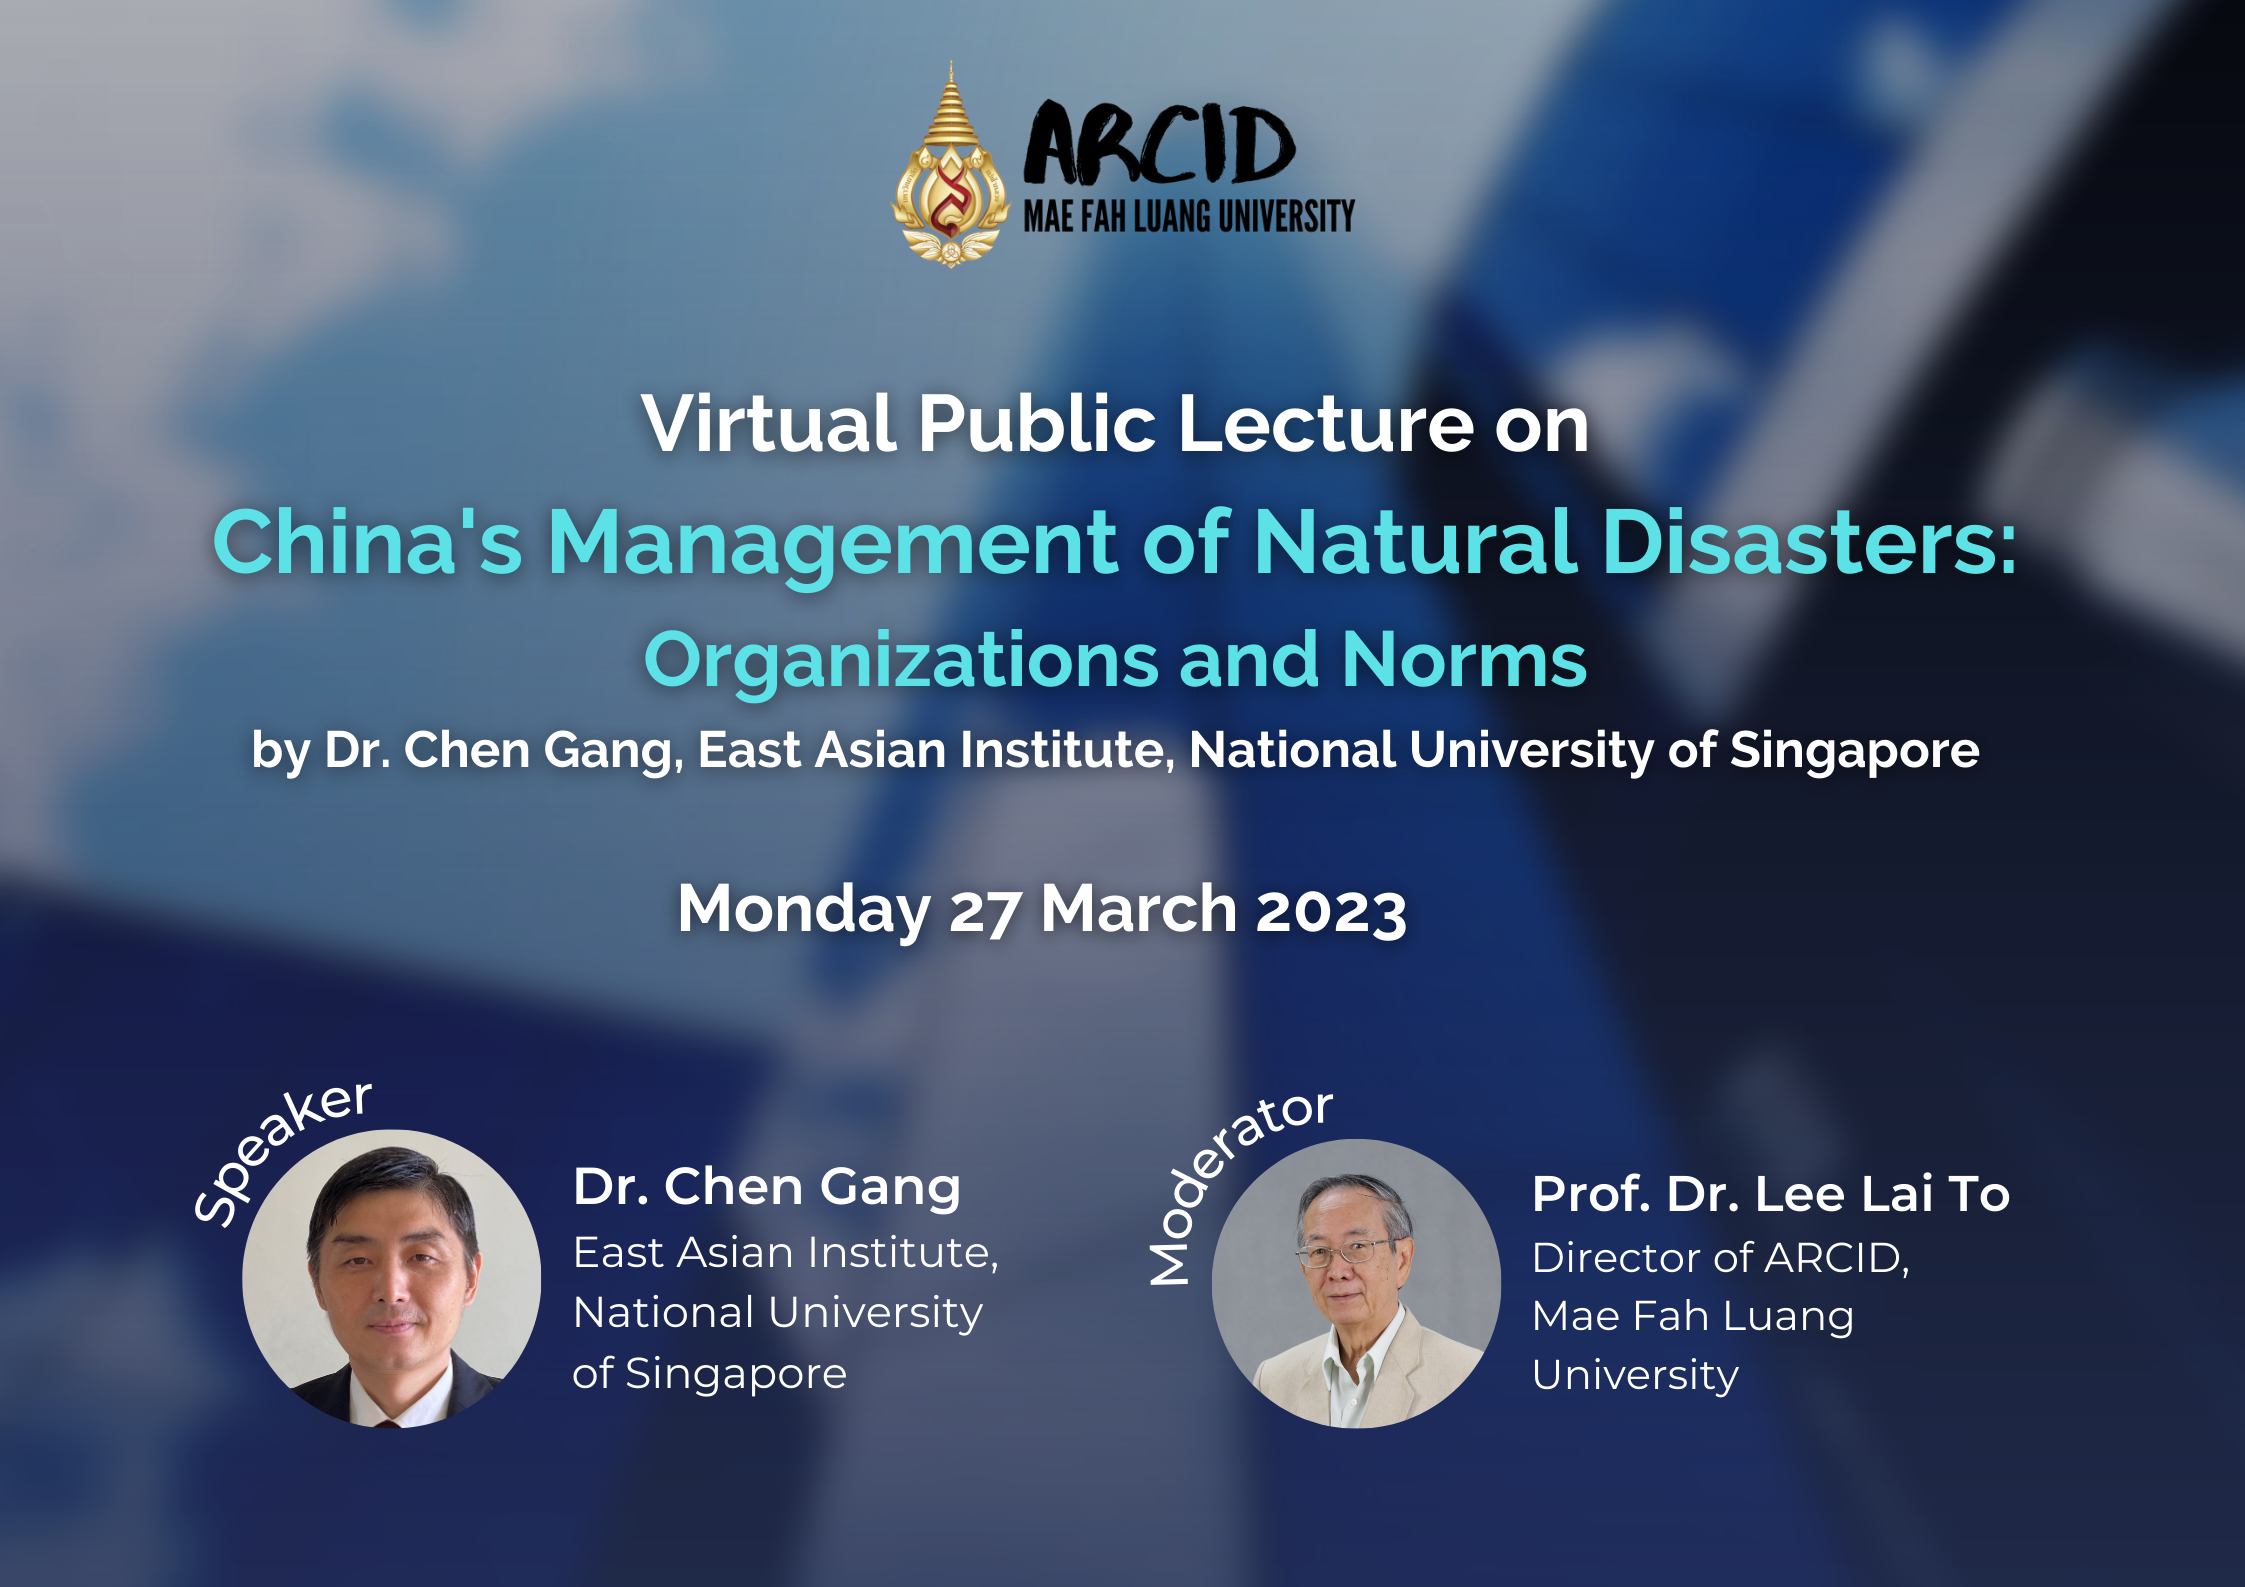 Public Lecture on Disaster and Emergency Management in China by Dr. Chen Gang